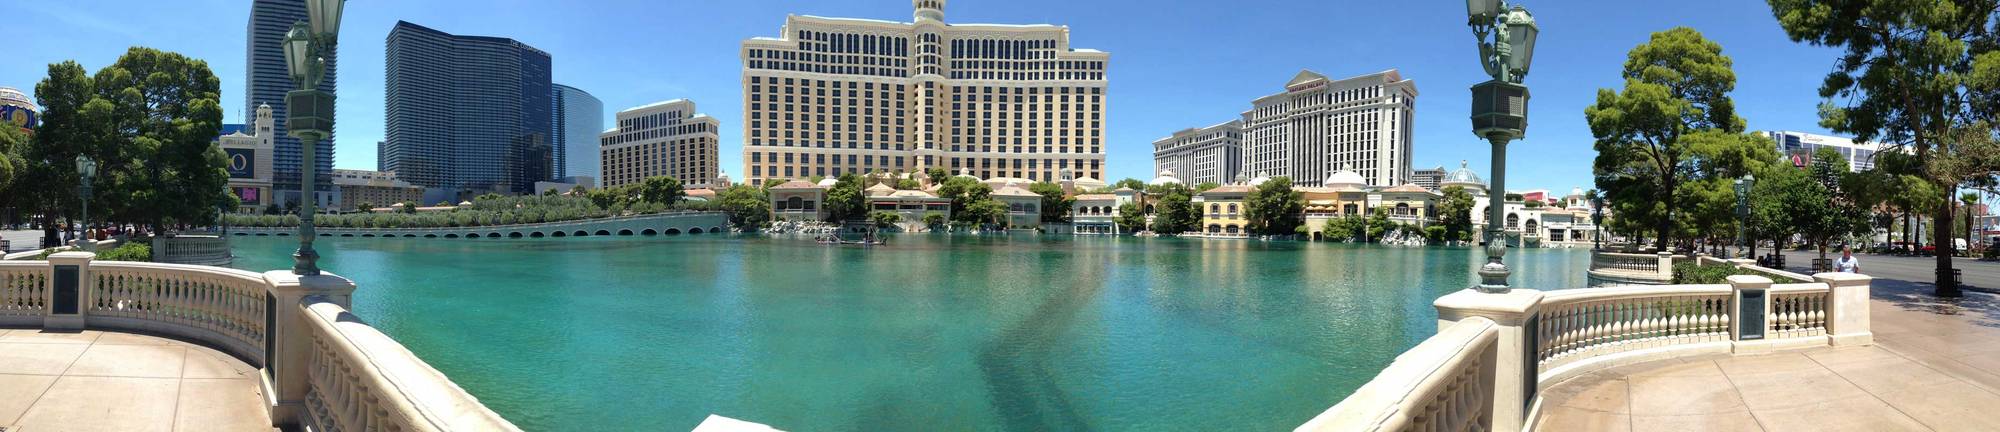 The Bellagio waterfront